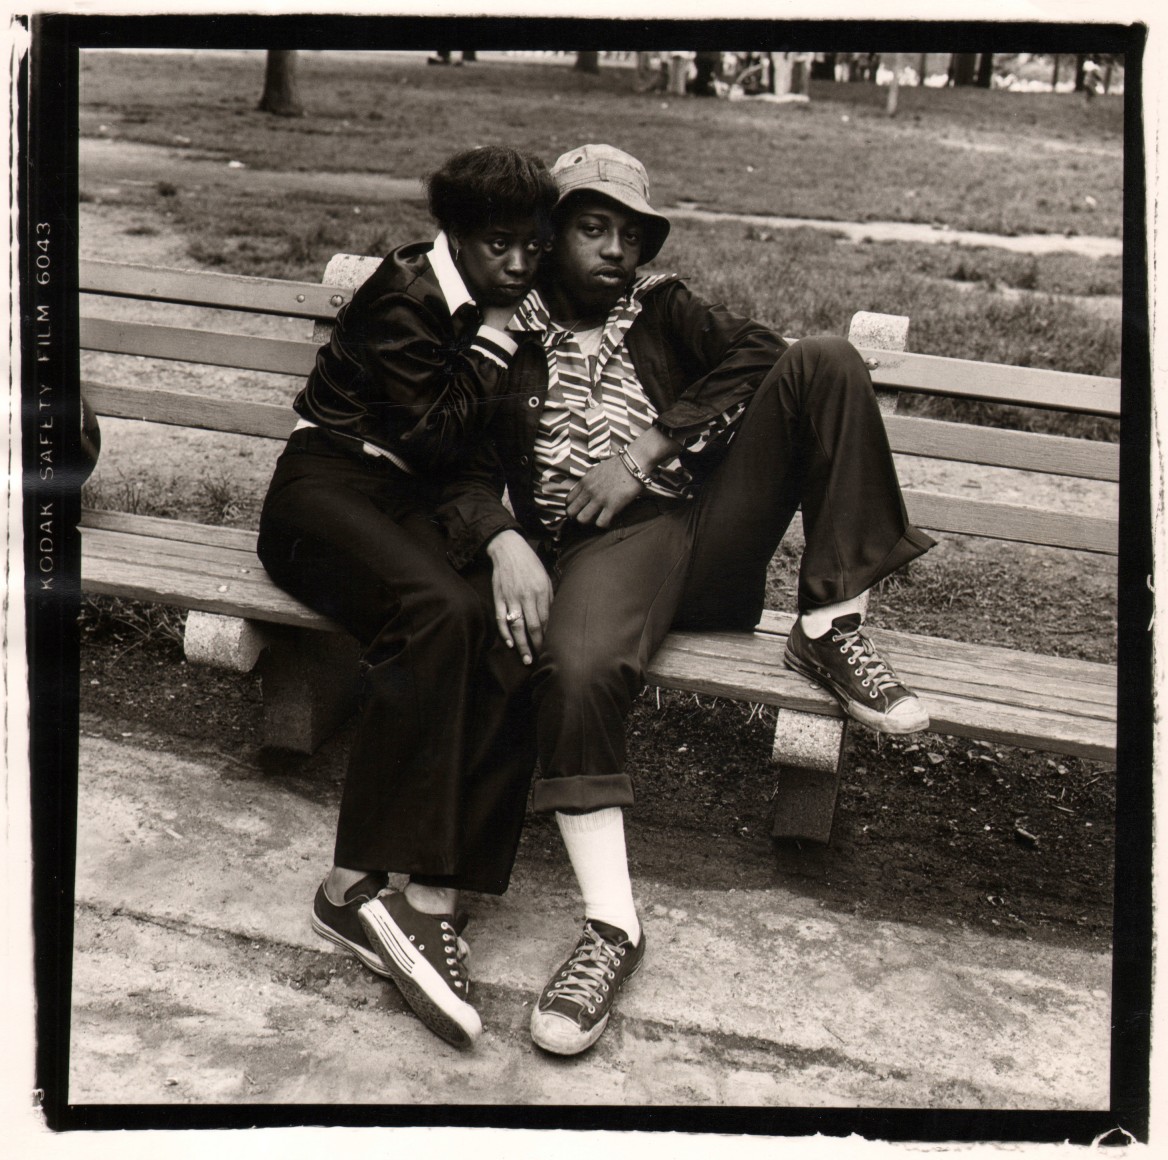 20. Anthony Barboza, NYC, ​1970s. A black couple recline on a wooden park bench.